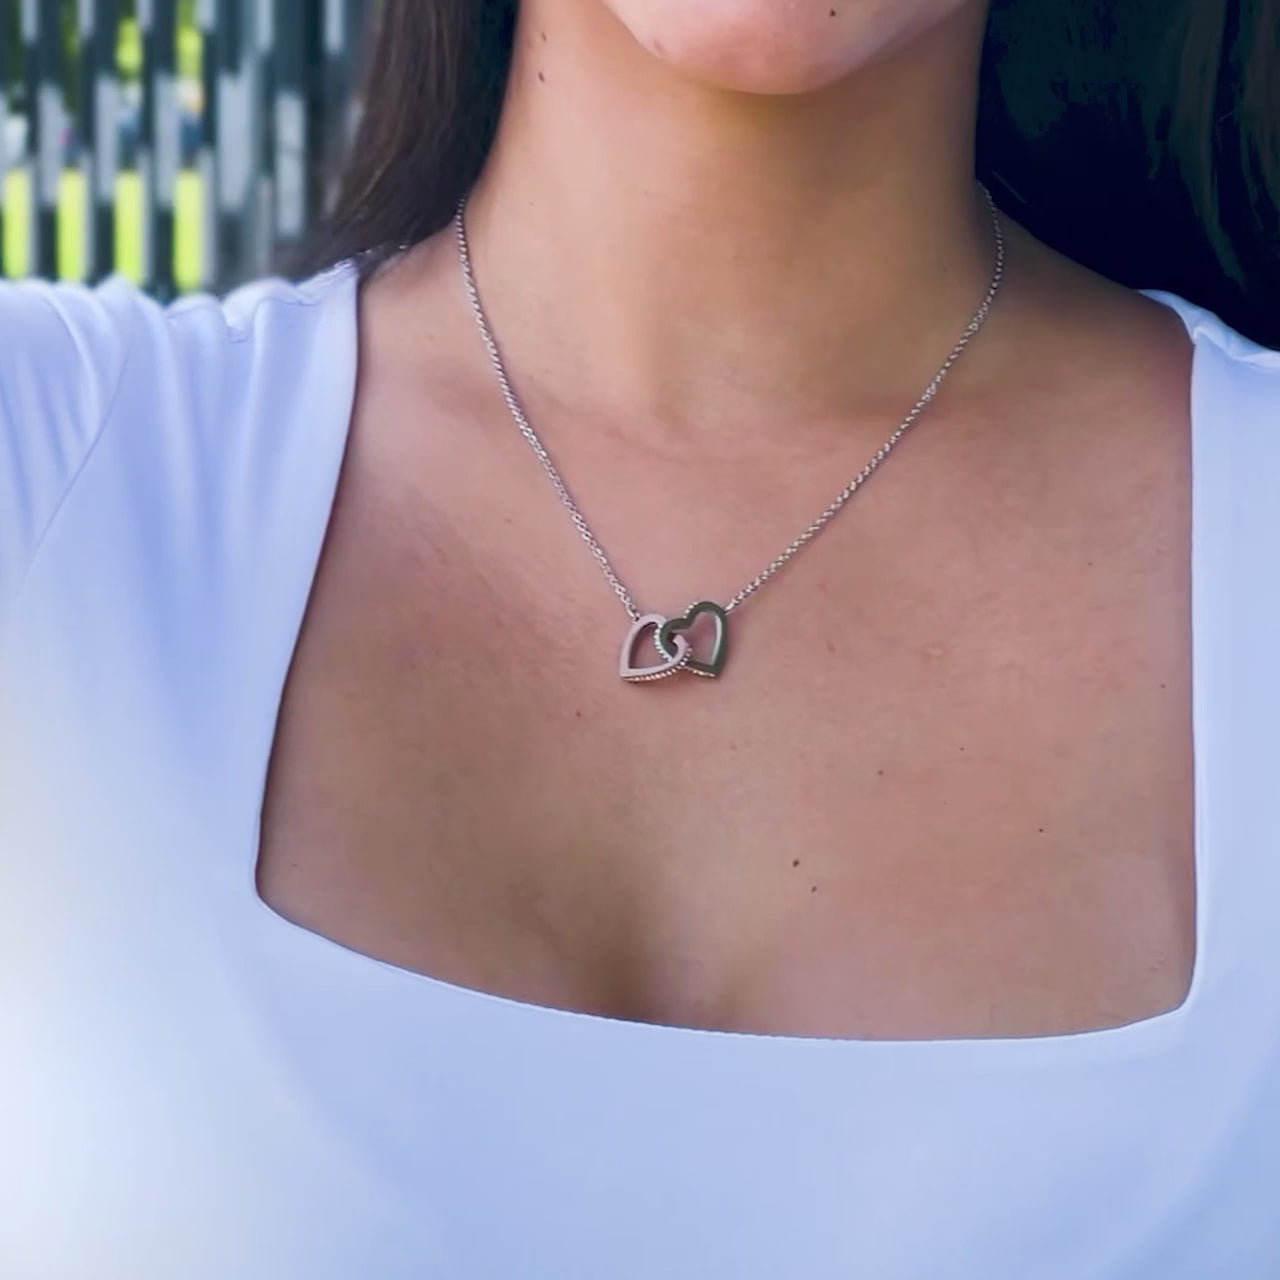 To Our Daughter - Interlocked Hearts Necklace - We Will Always Be There For You